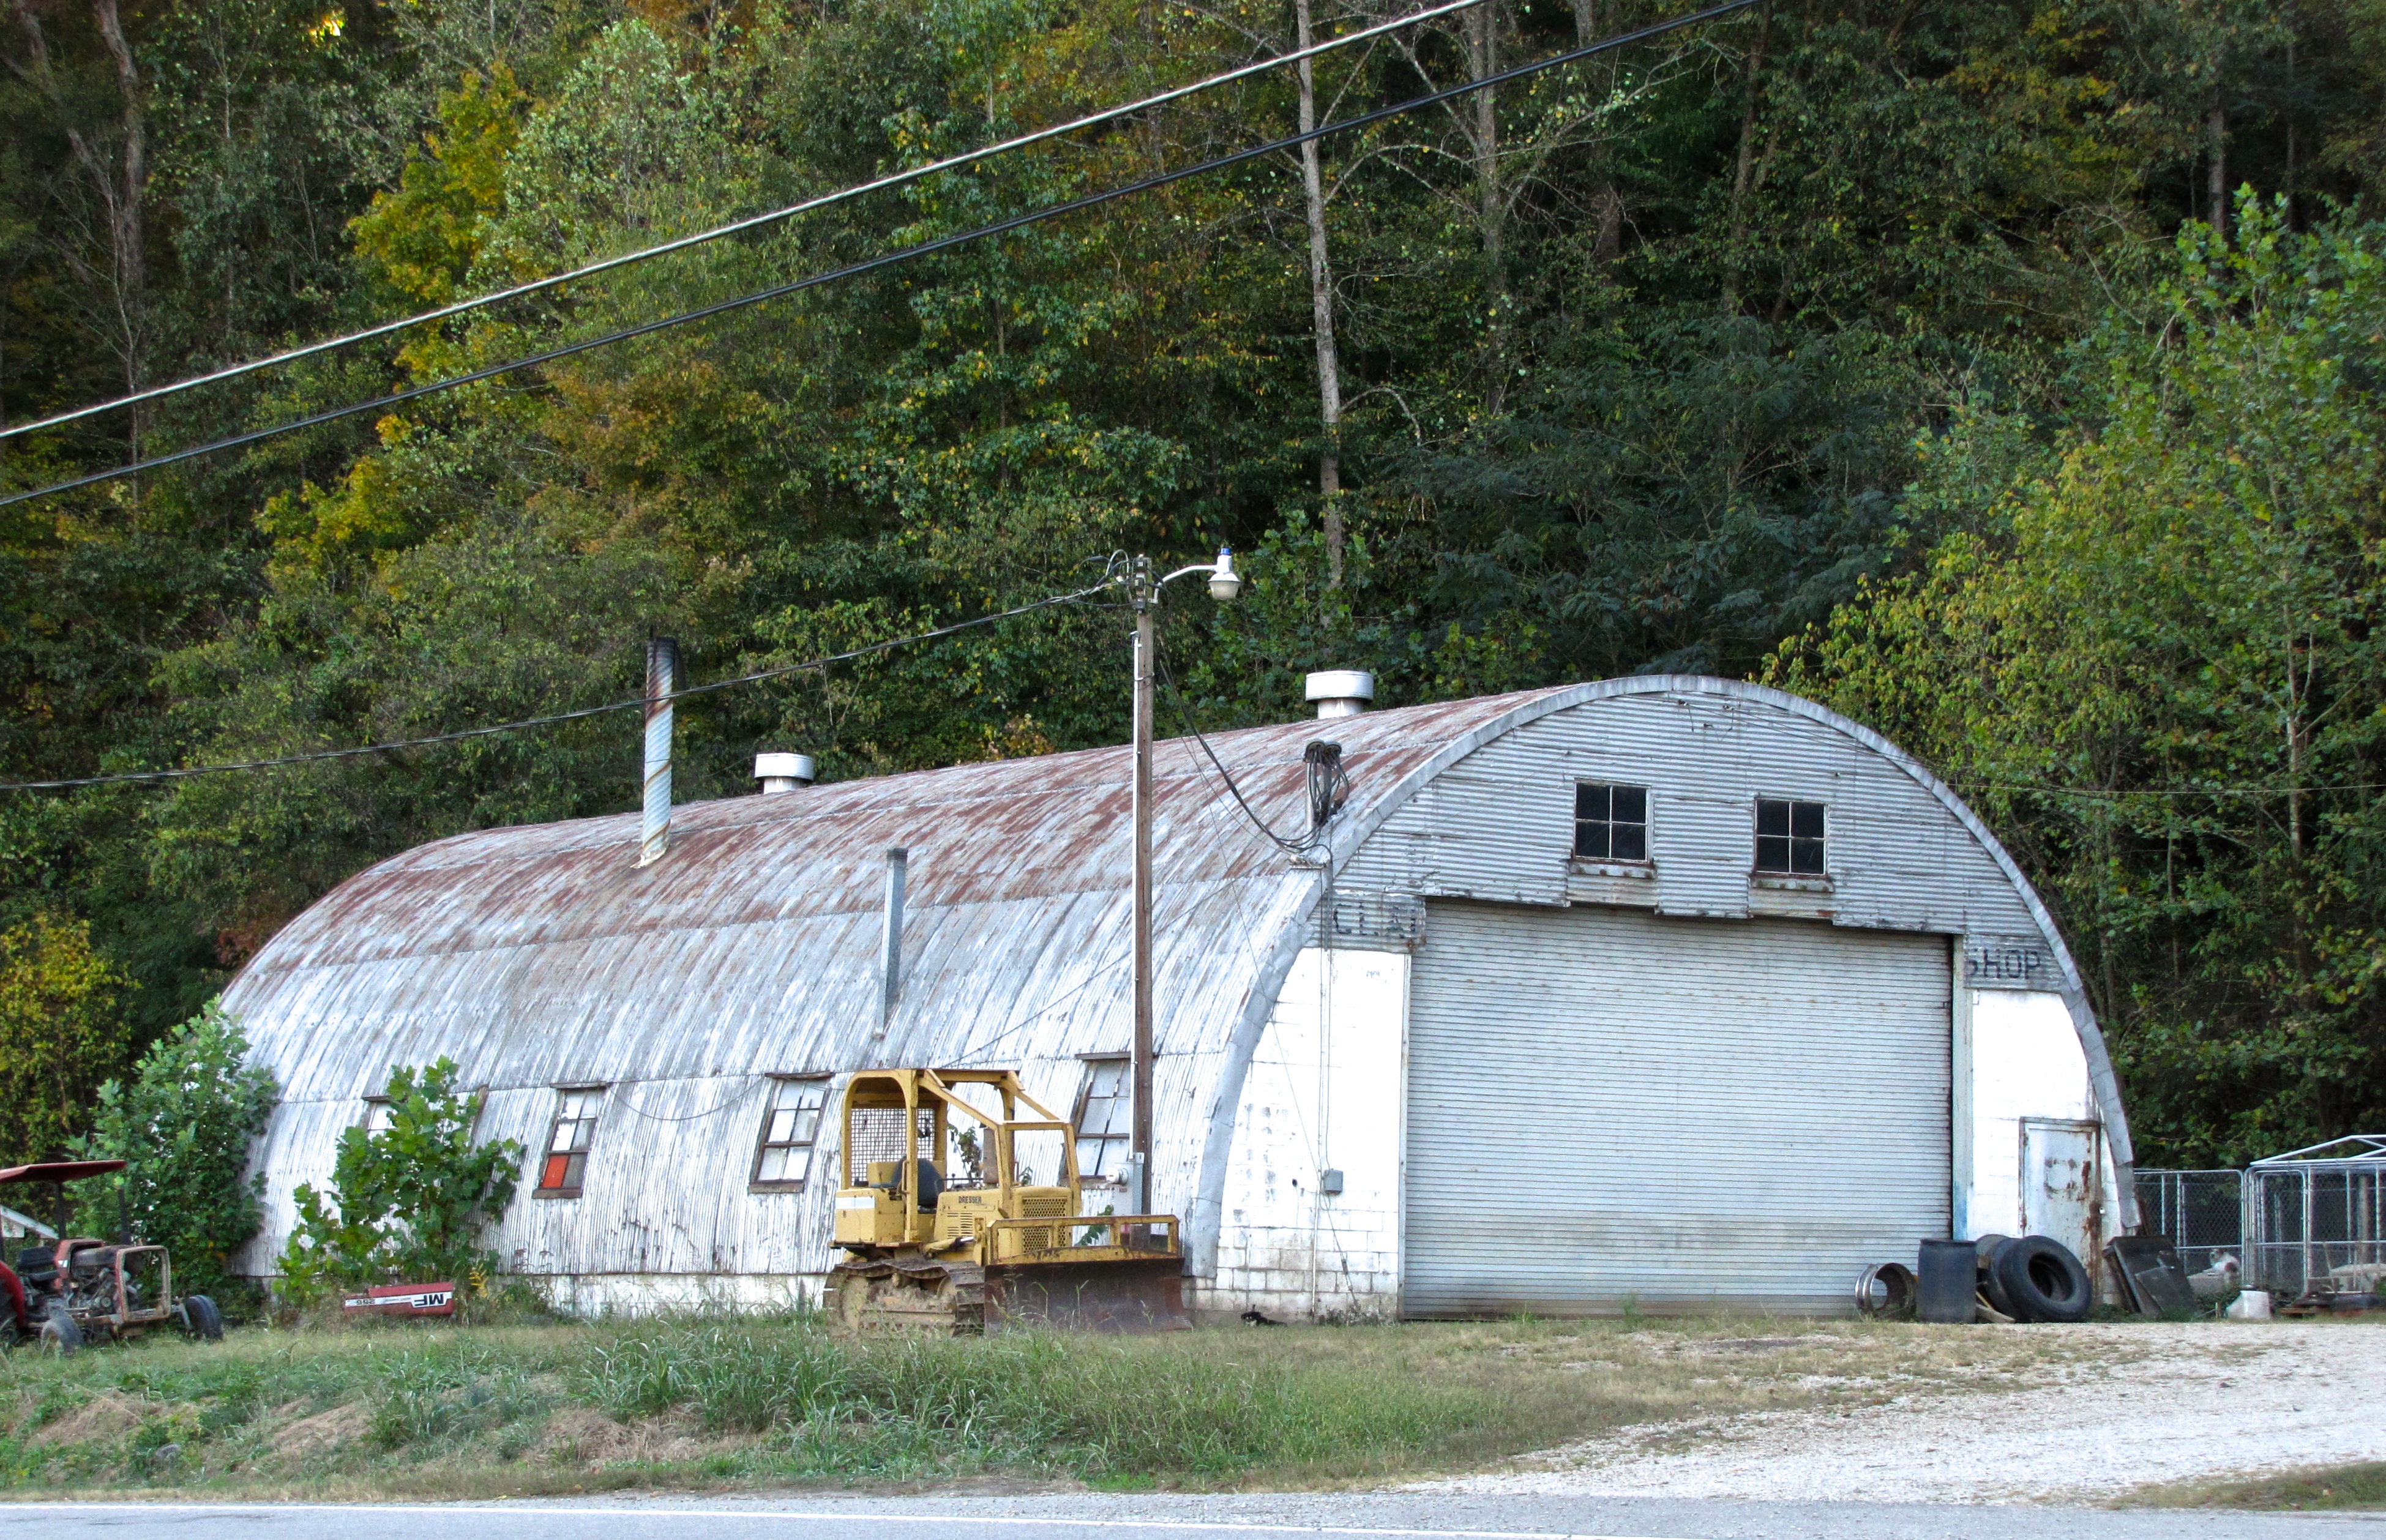 quonset hut in Terms Of Service, WA